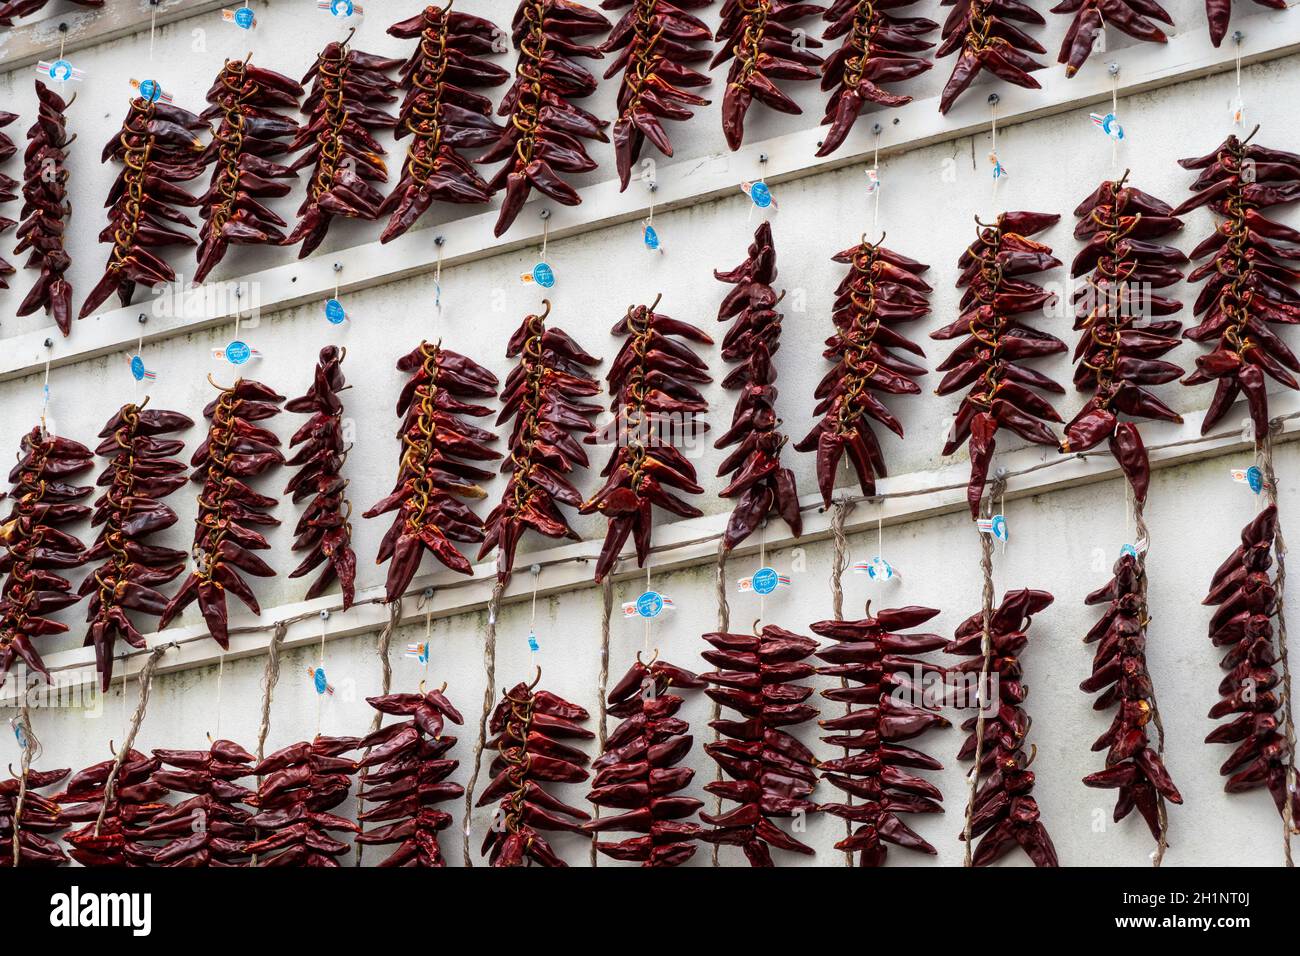 ESPELETTE, FRANCE - CIRCA JANUARY 2021: Strings of PDO Espelette chili peppers drying on white wall. Stock Photo